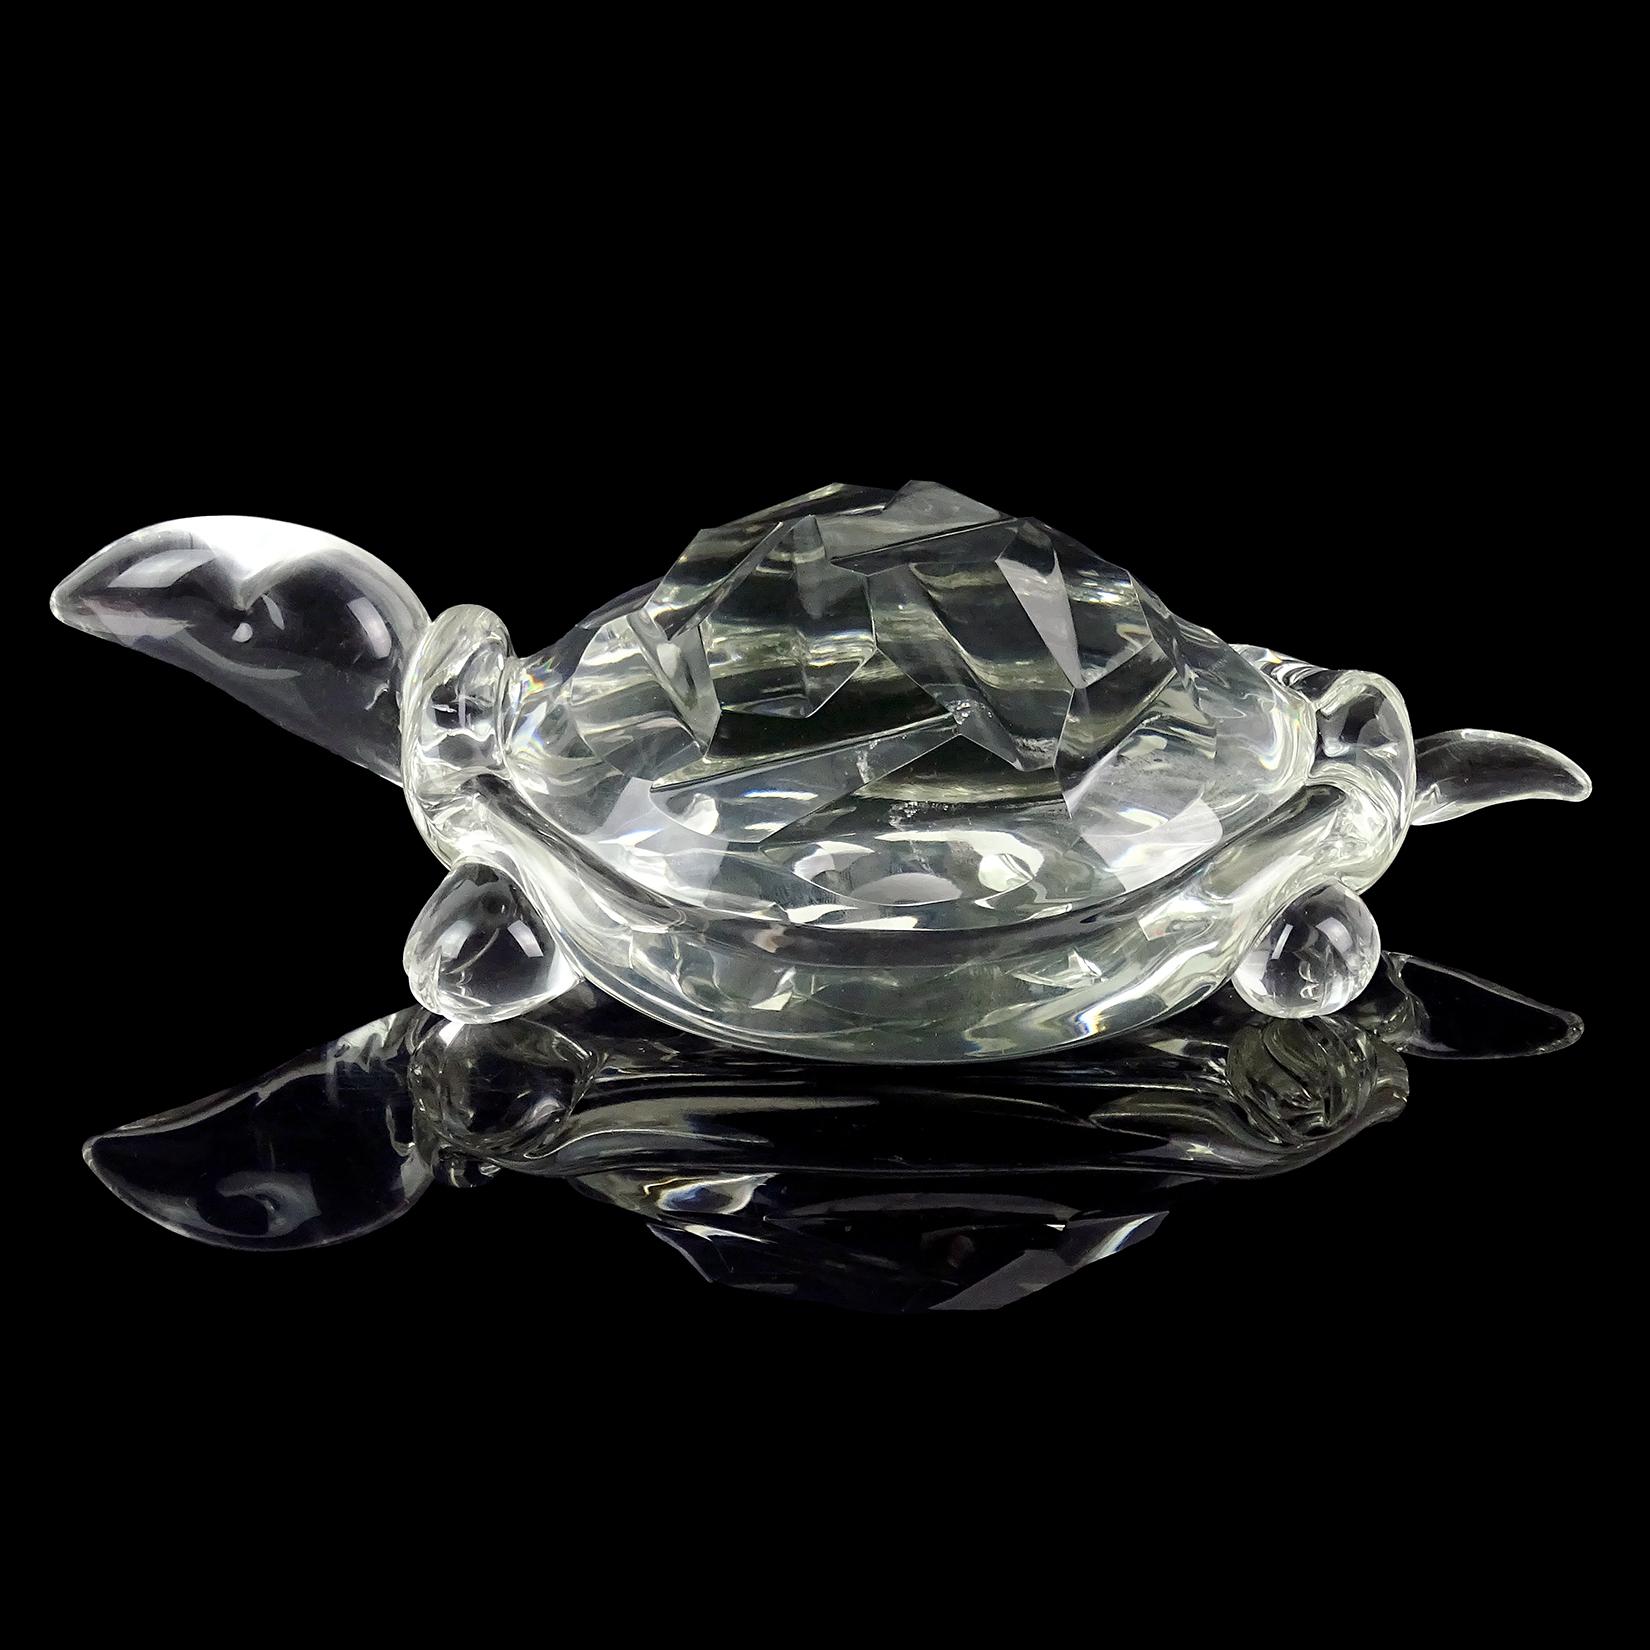 Beautiful vintage Murano hand blown crystal clear, faceted shell, Italian art glass turtle sculpture. Documented to designer Archimede Seguso, and signed 